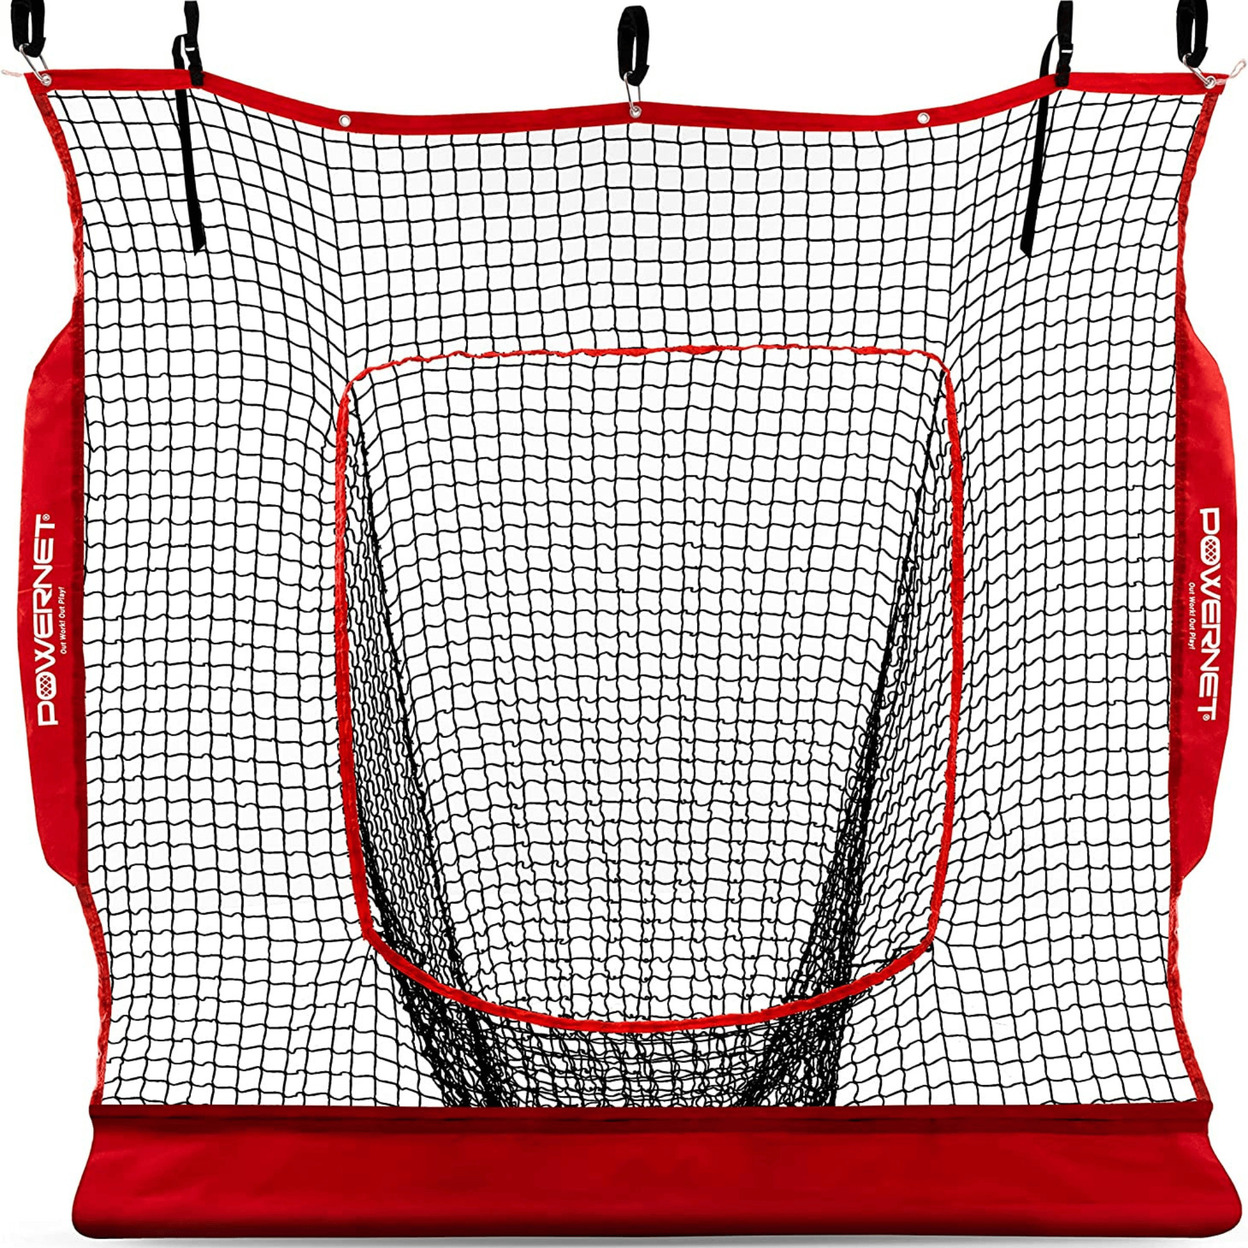 PowerNet Hanging Dual Practice Net 7x7 (Net Only)